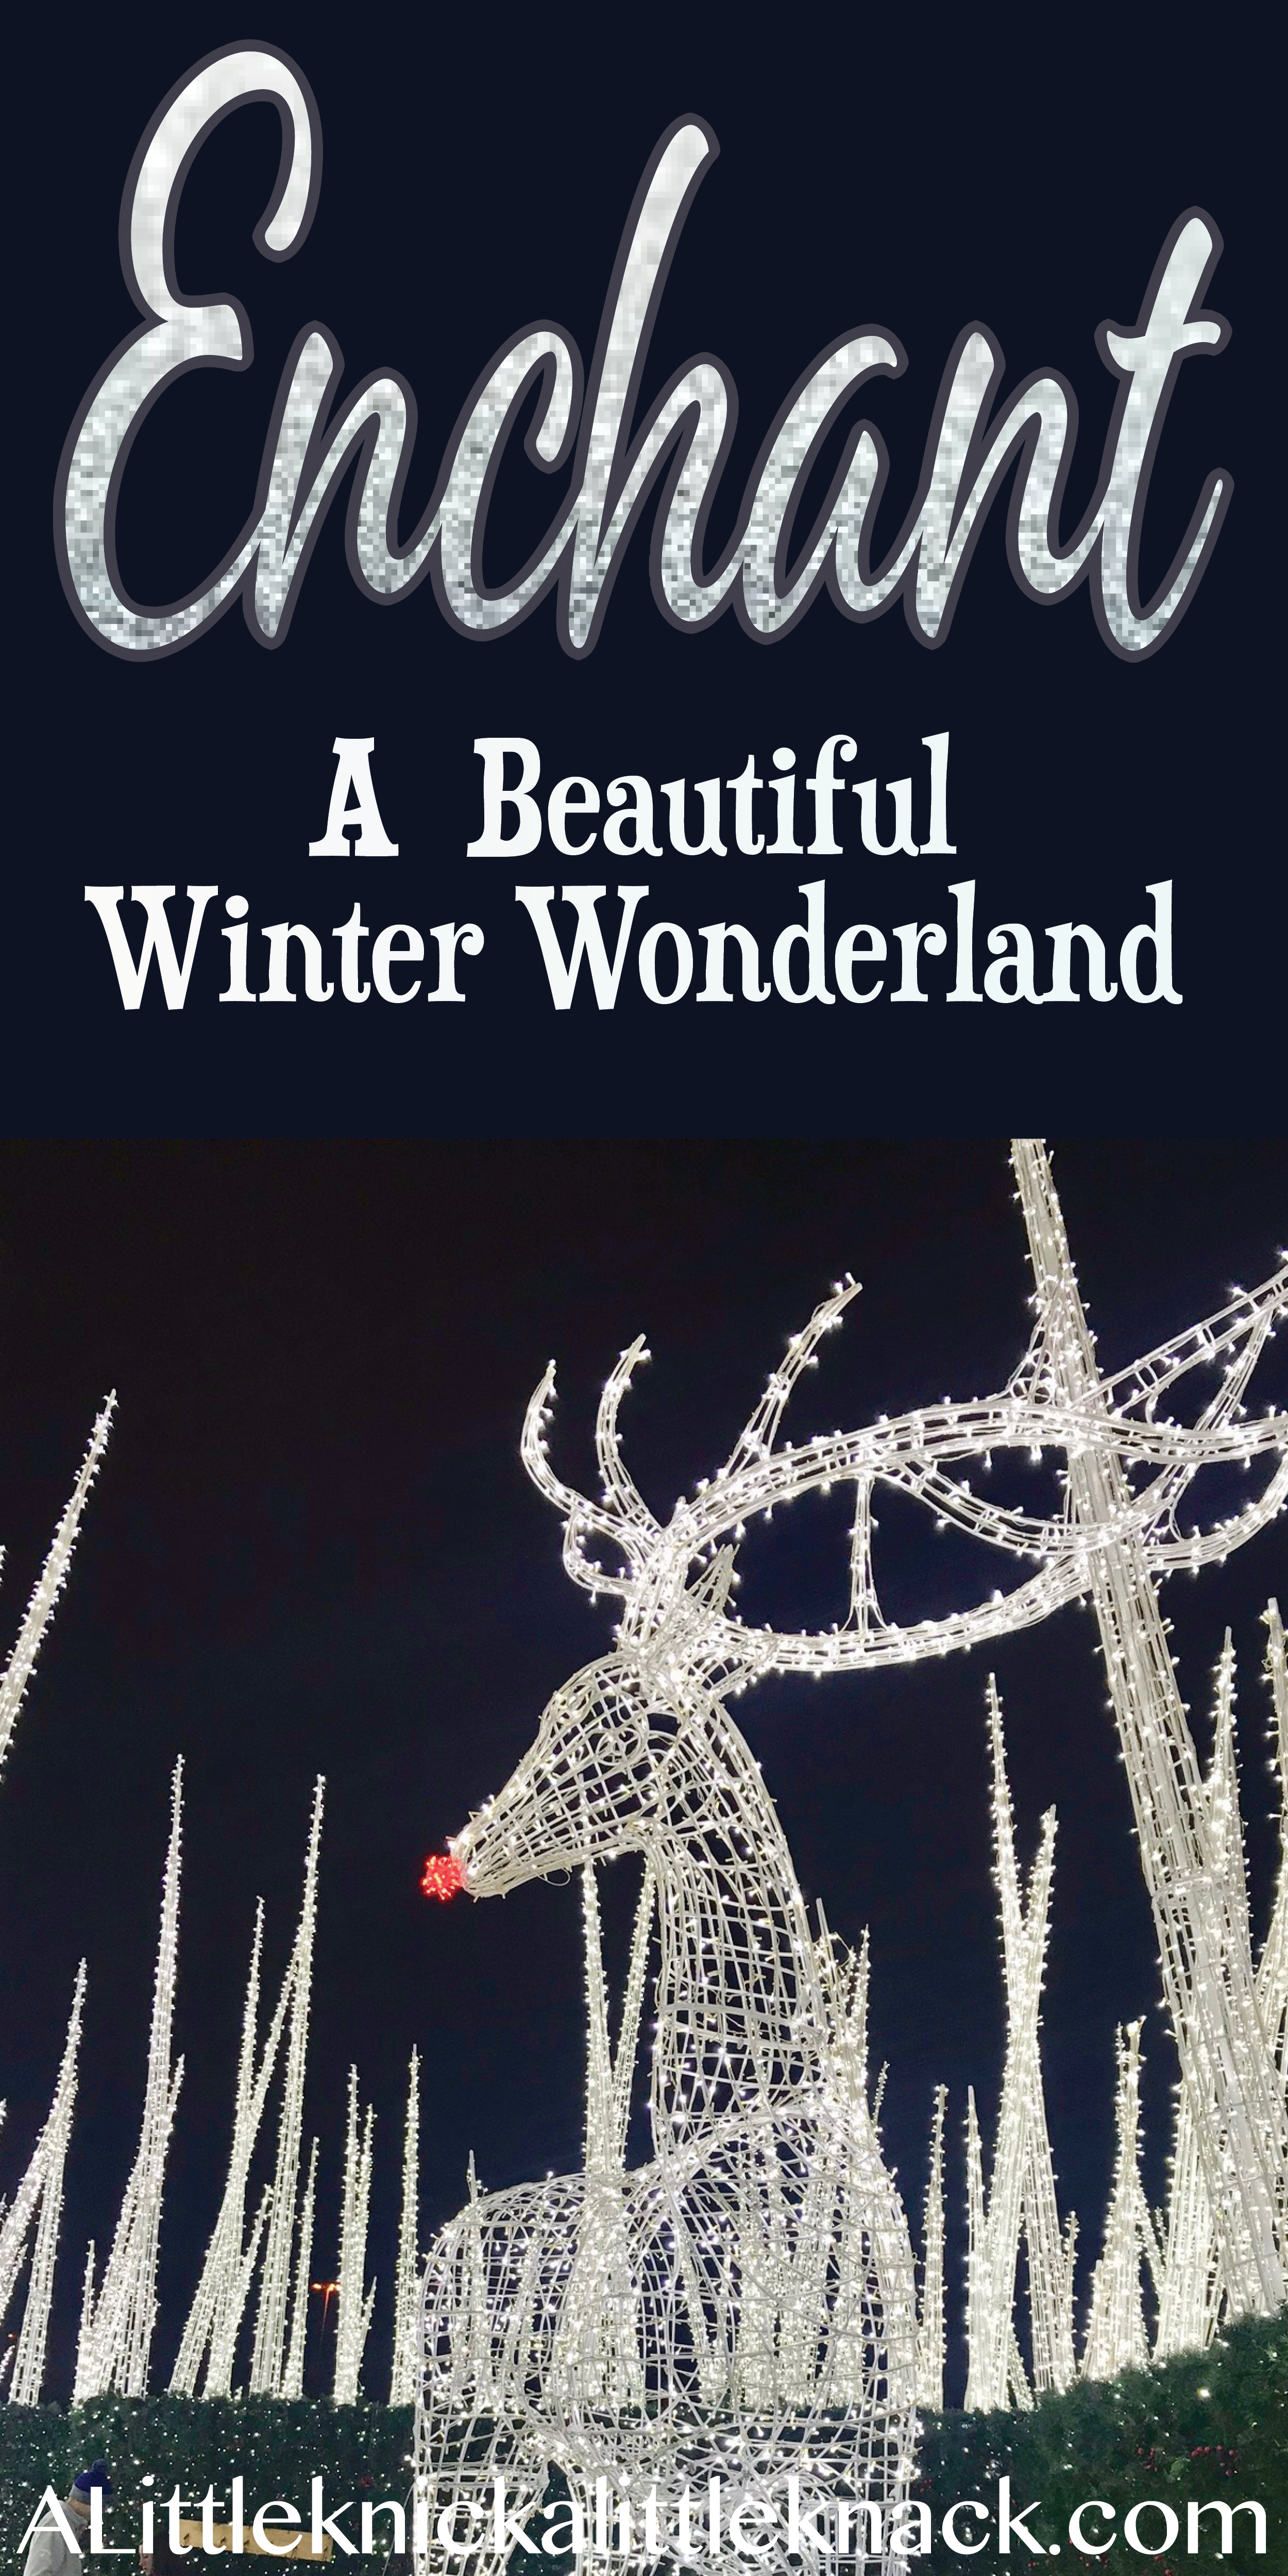 We headed to Enchant in Arlington, Texas and here is what we really thought! #Winterfun